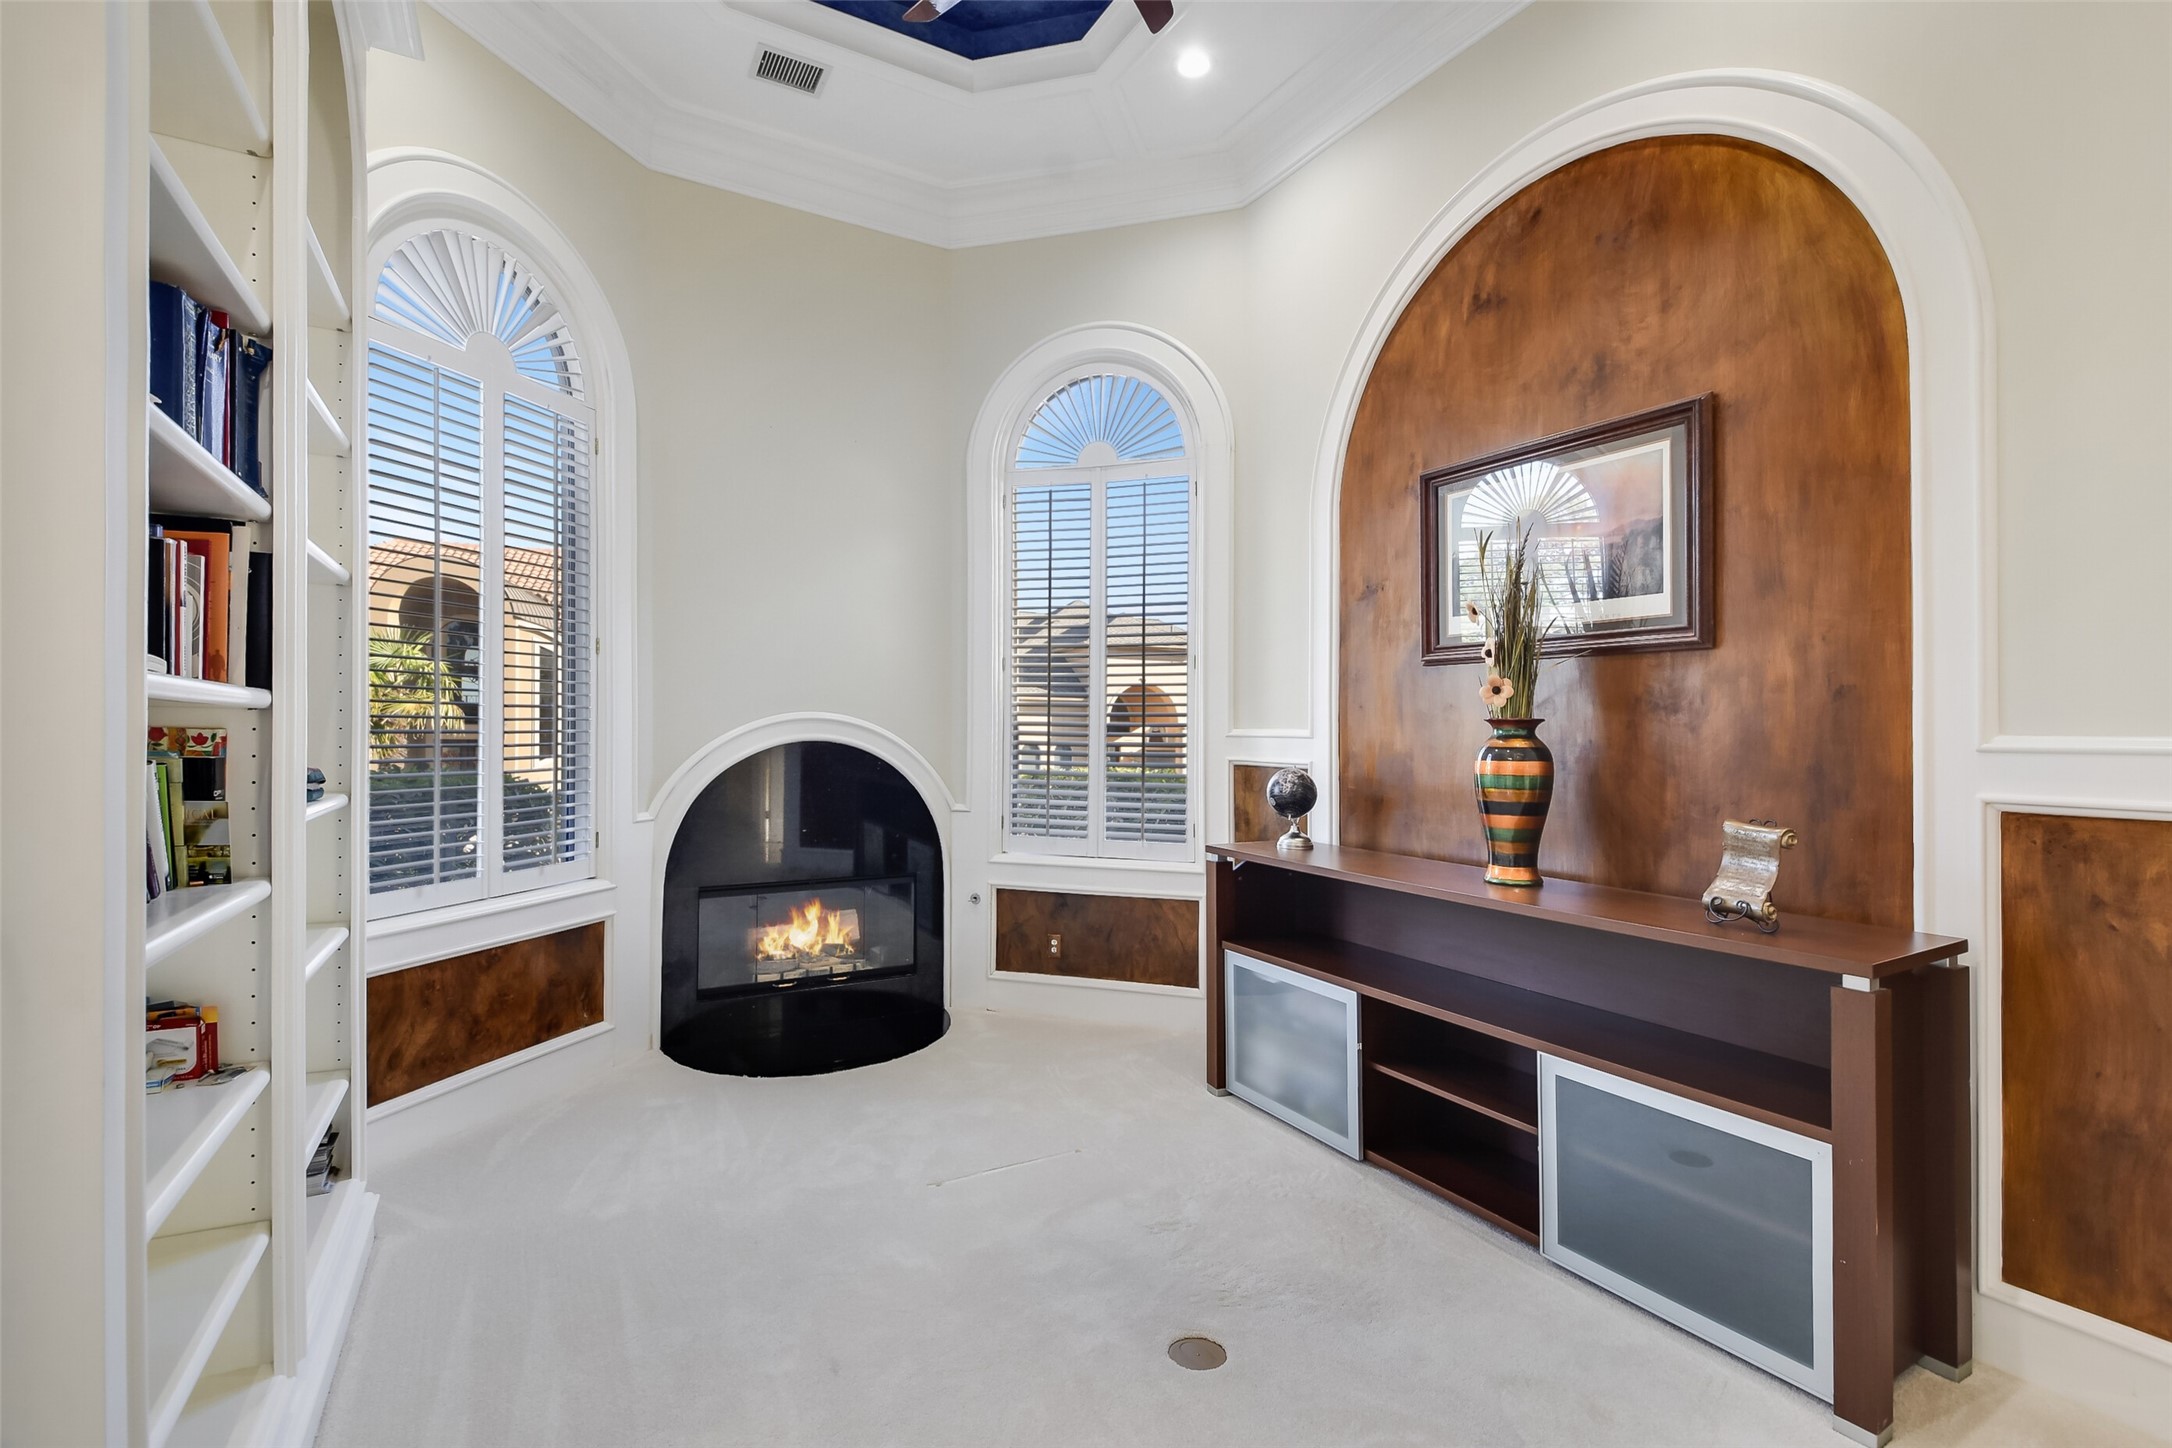 Study/Office with lakeview boasts built-in shelves and a gas log fireplace.